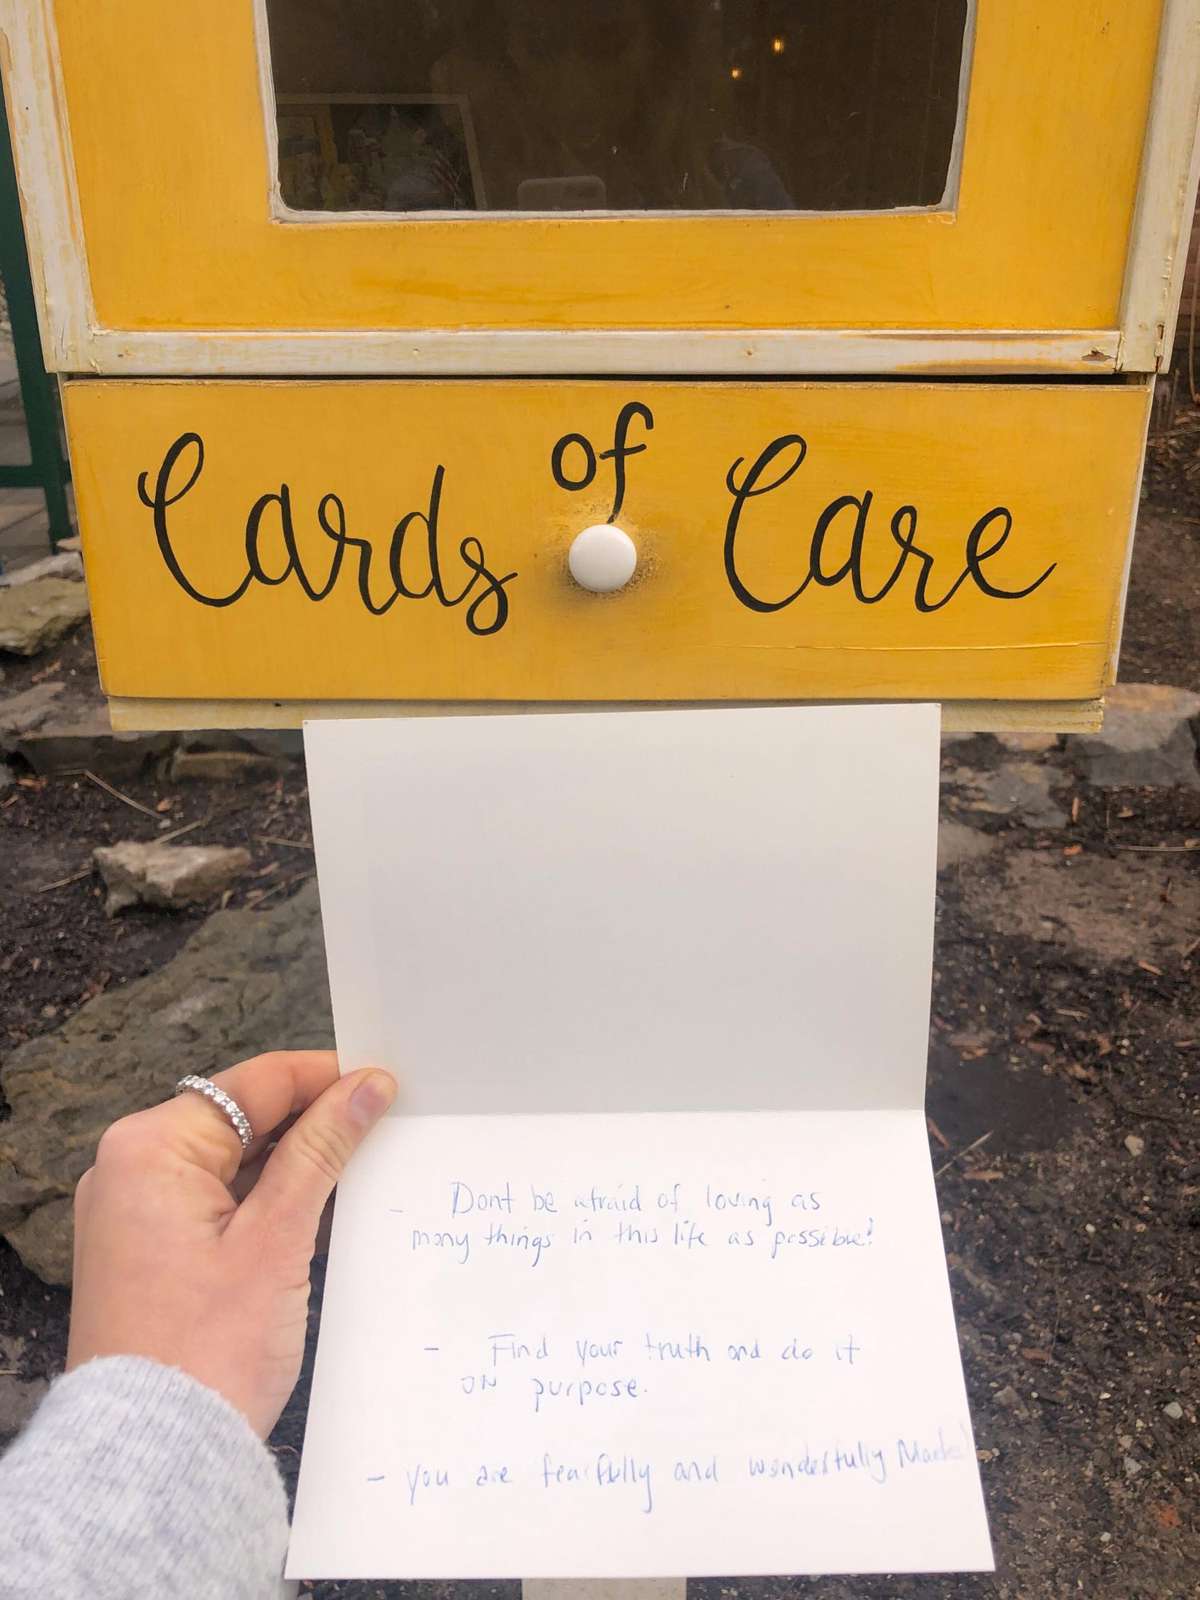 Cards Of Care letter